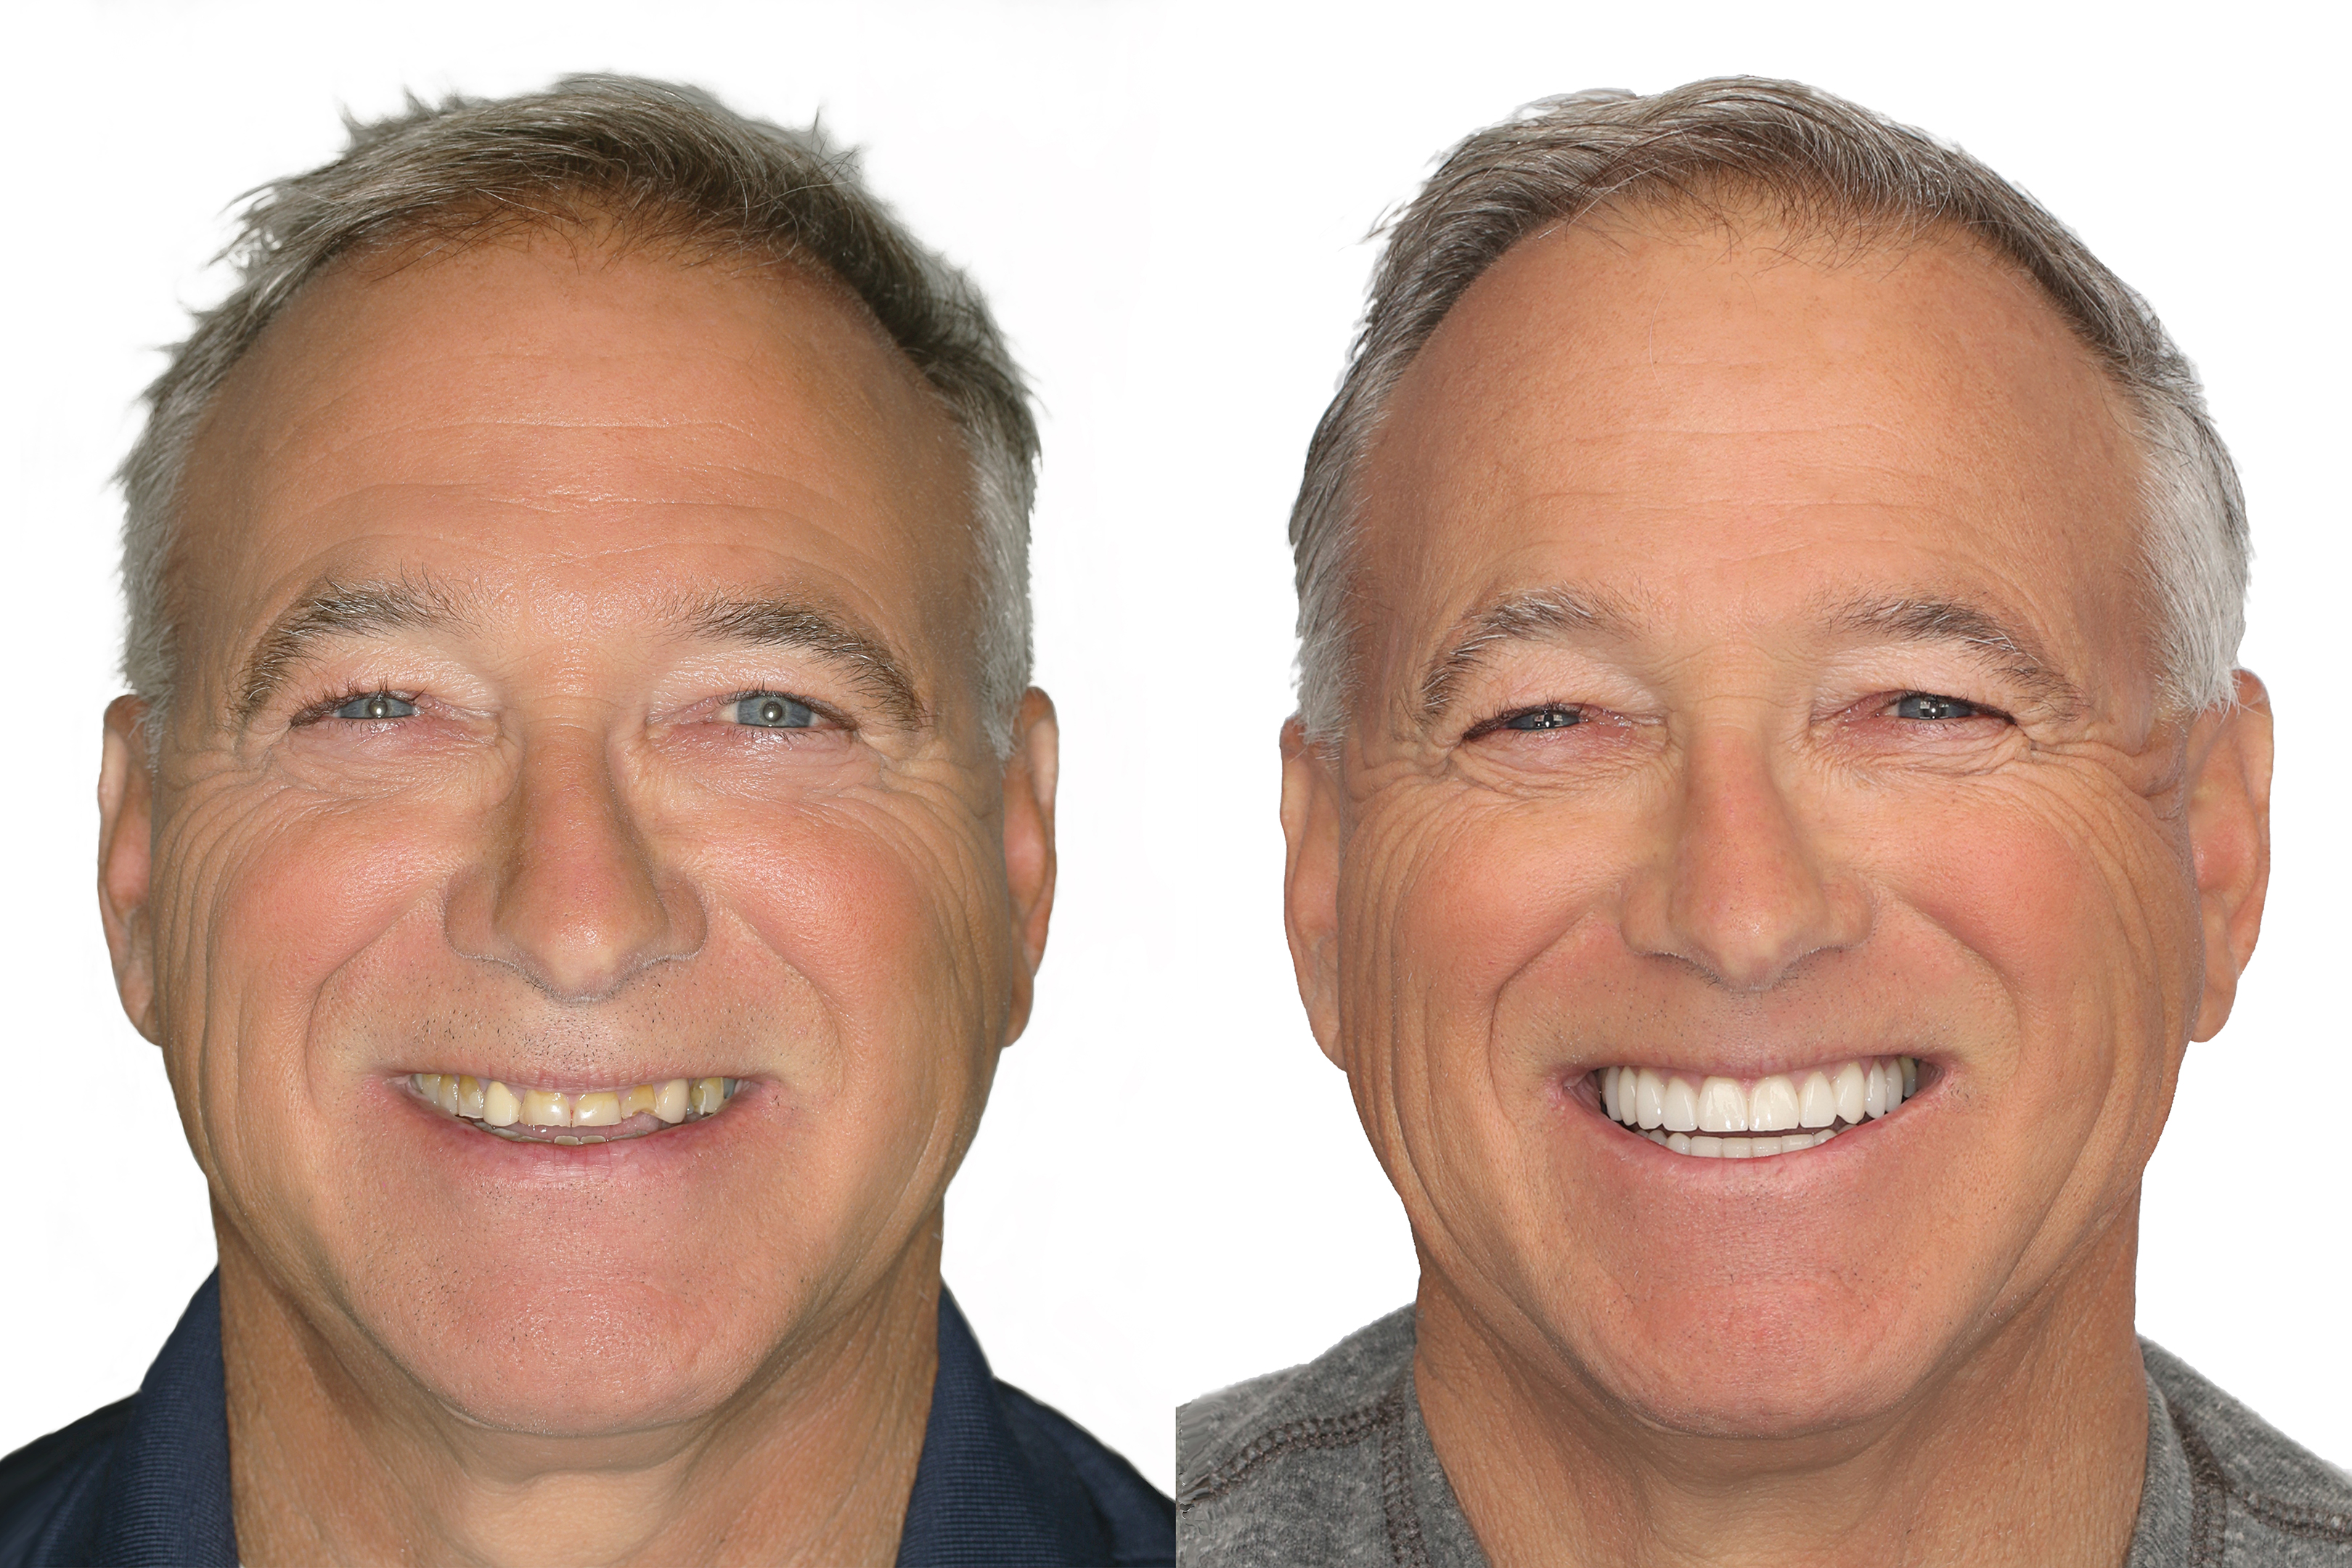 Restoring Your Smile to Health